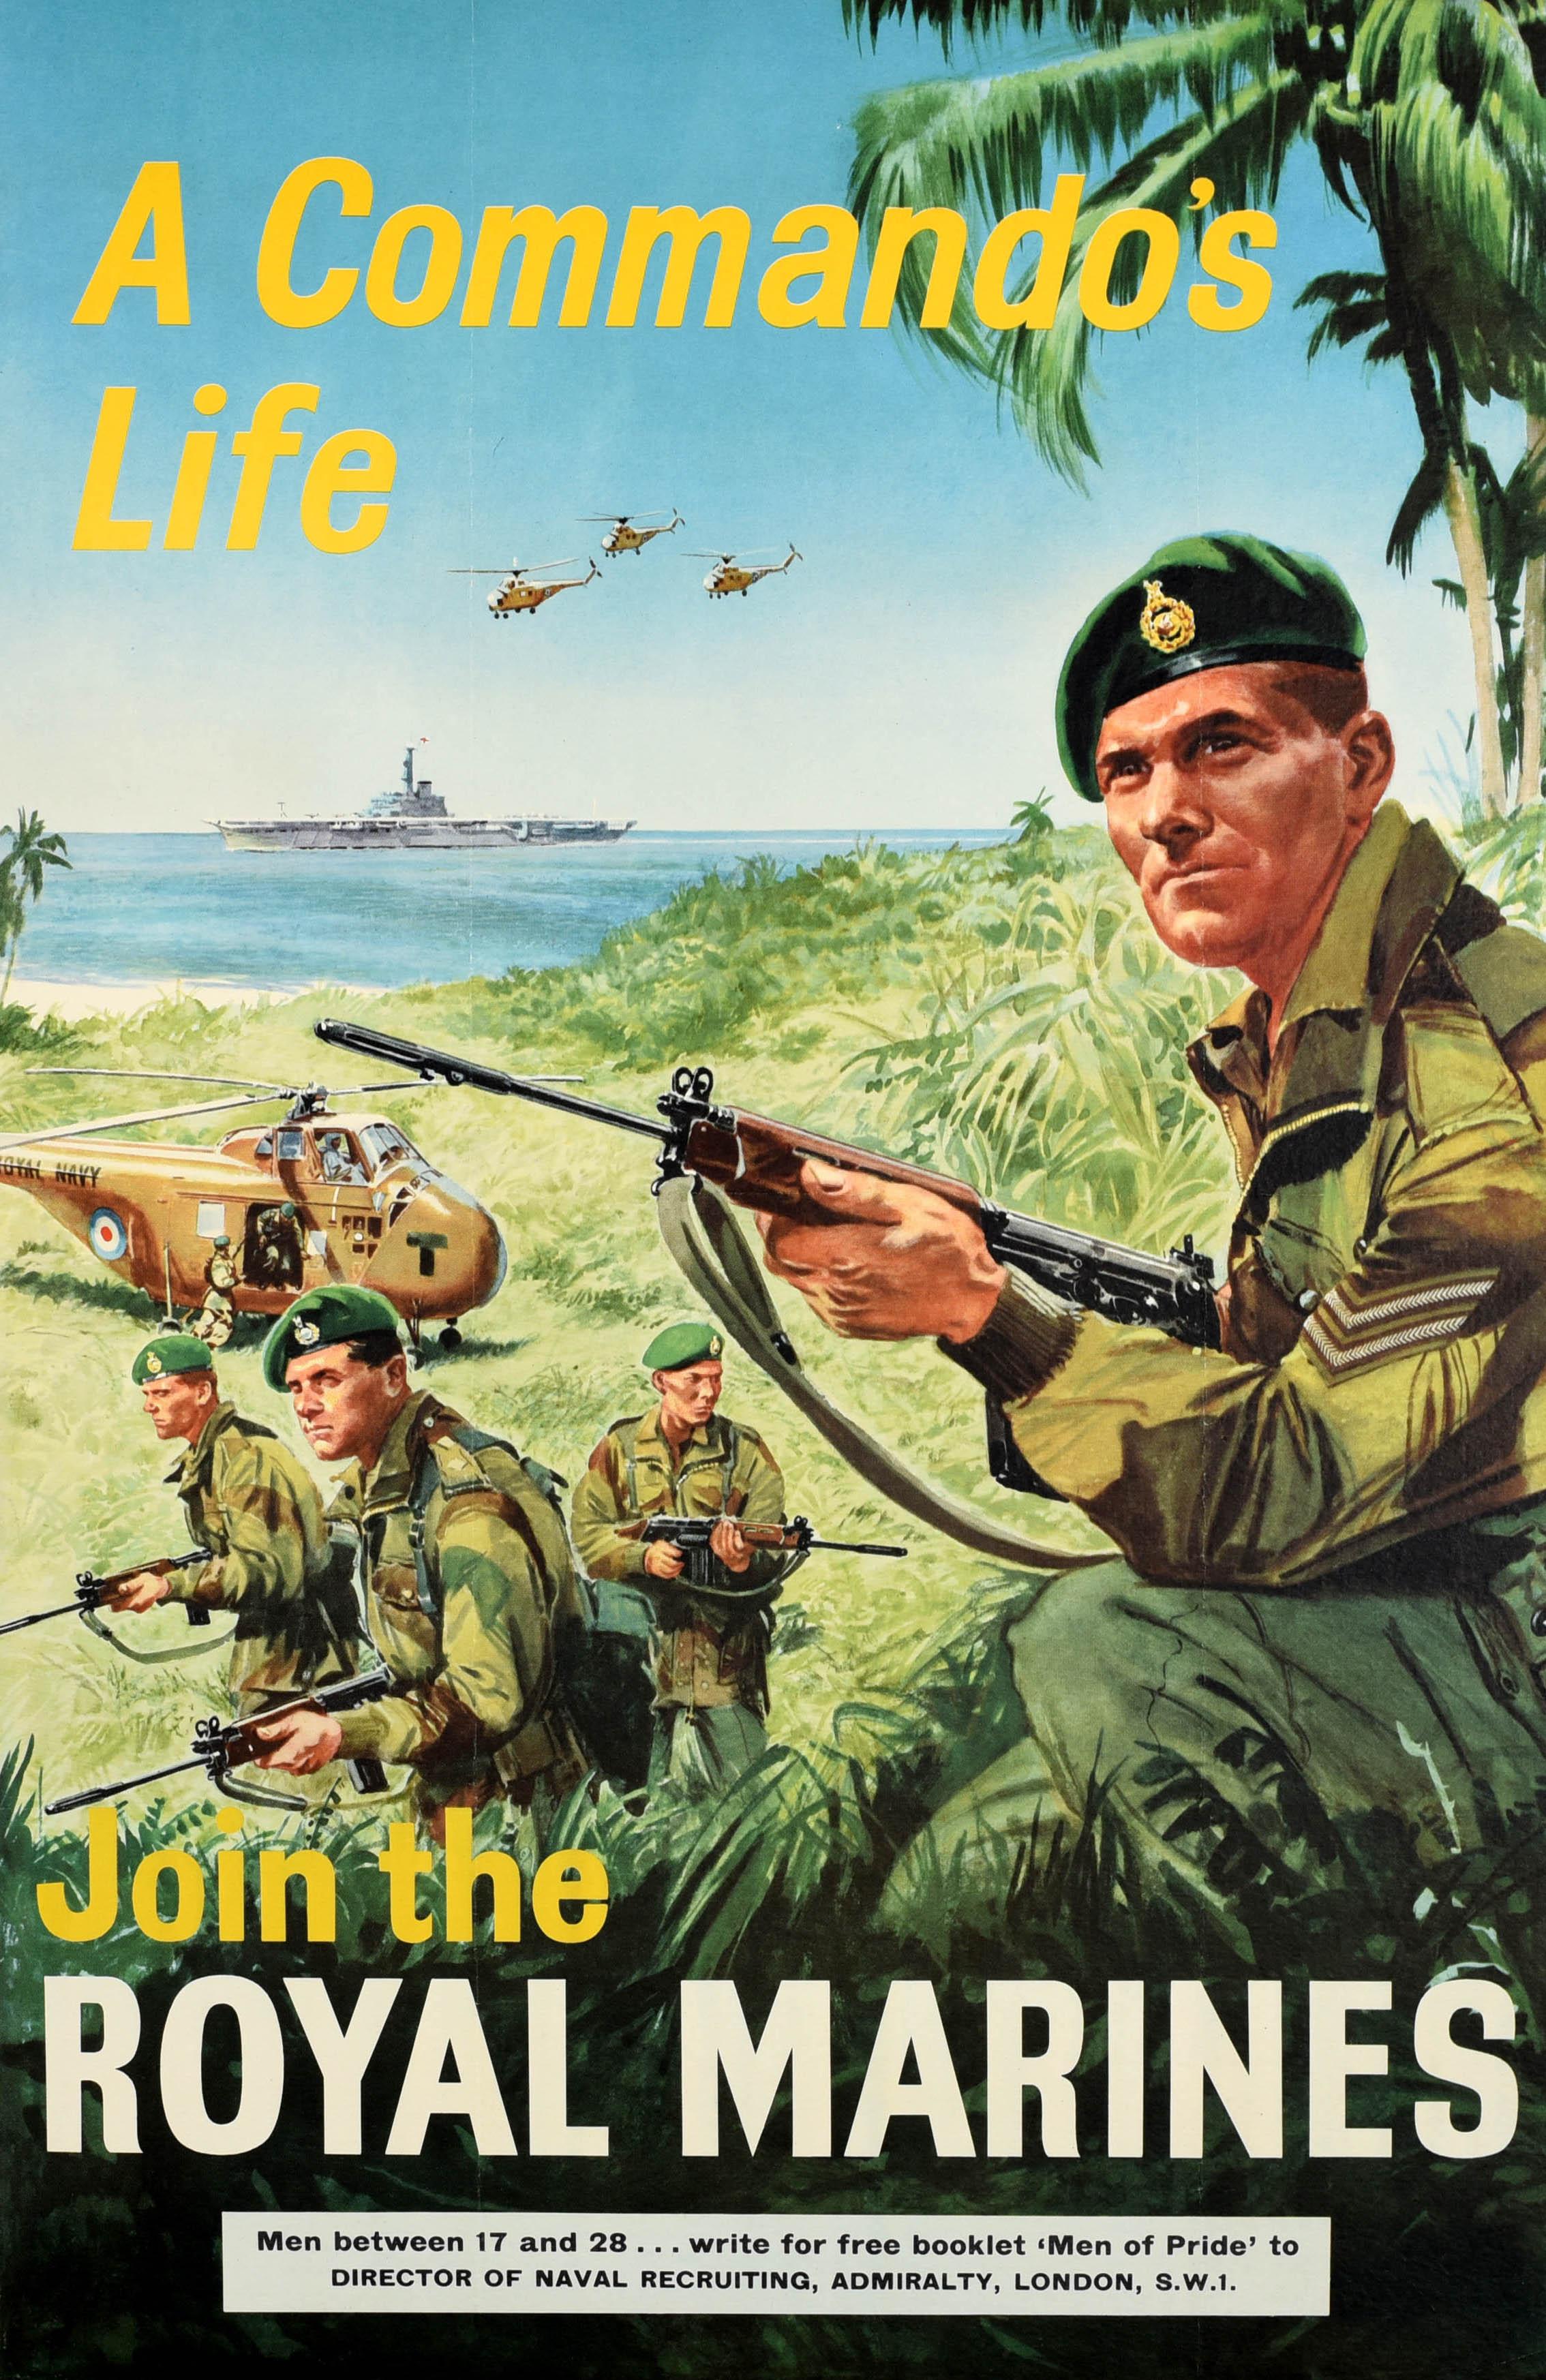 Original vintage military recruitment poster - A Commando's Life Join the Royal Marines - featuring artwork depicting a troop of soldiers wearing green berets and camouflage uniform armed with guns walking through the undergrowth with helicopters